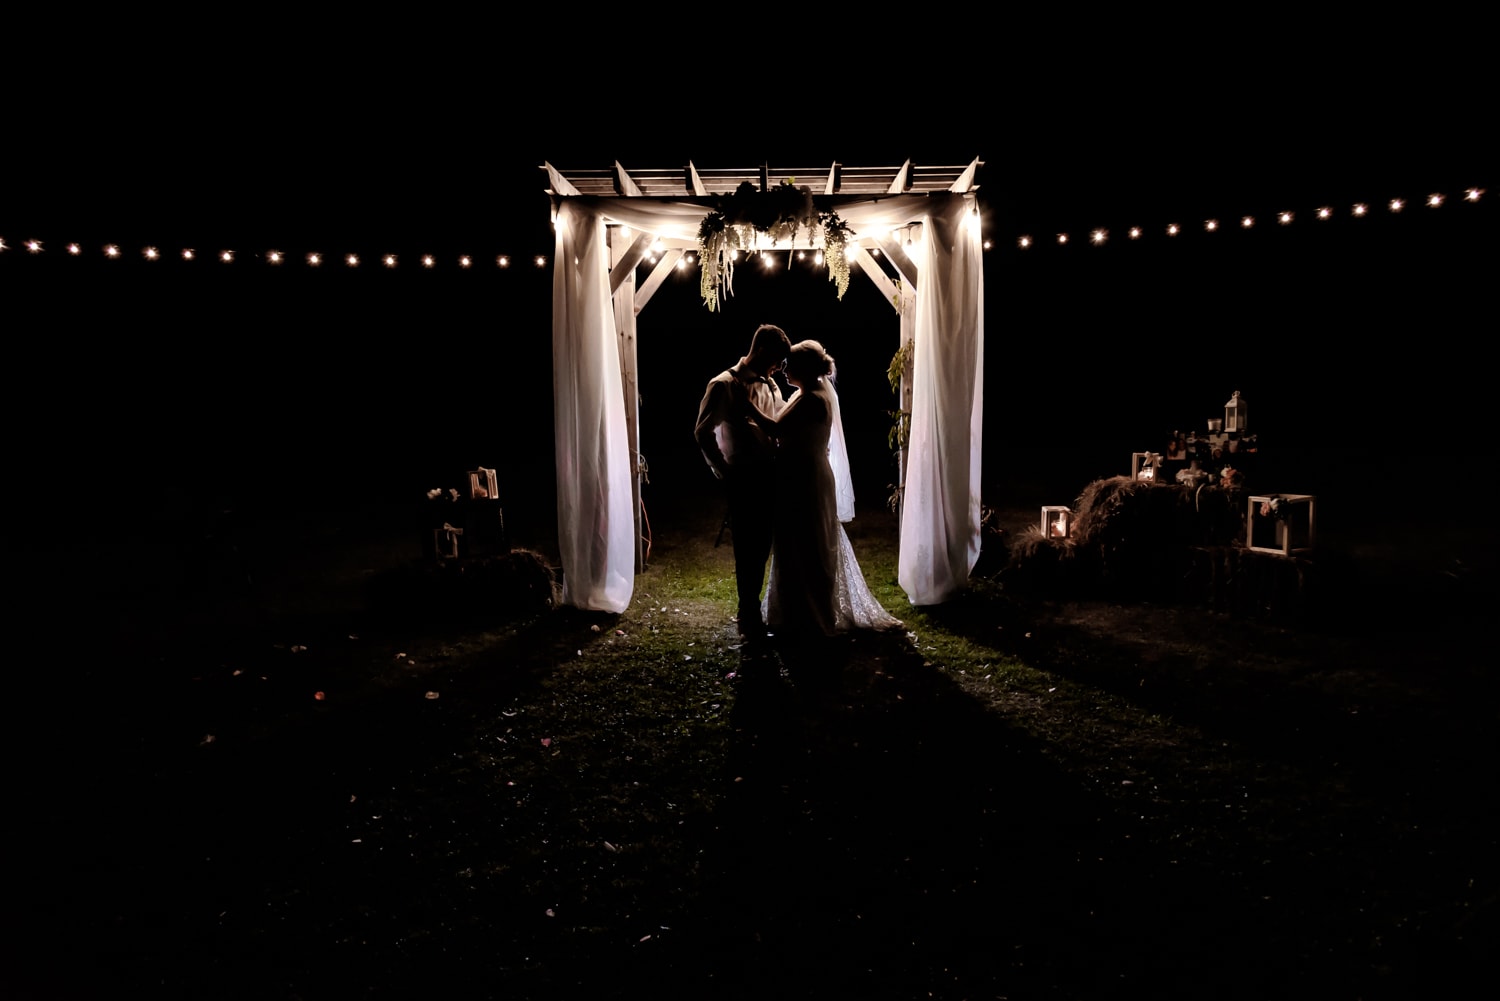 The bride and groom pose for a night silhouette portrait at their wedding at the barn at sadie belle farm.